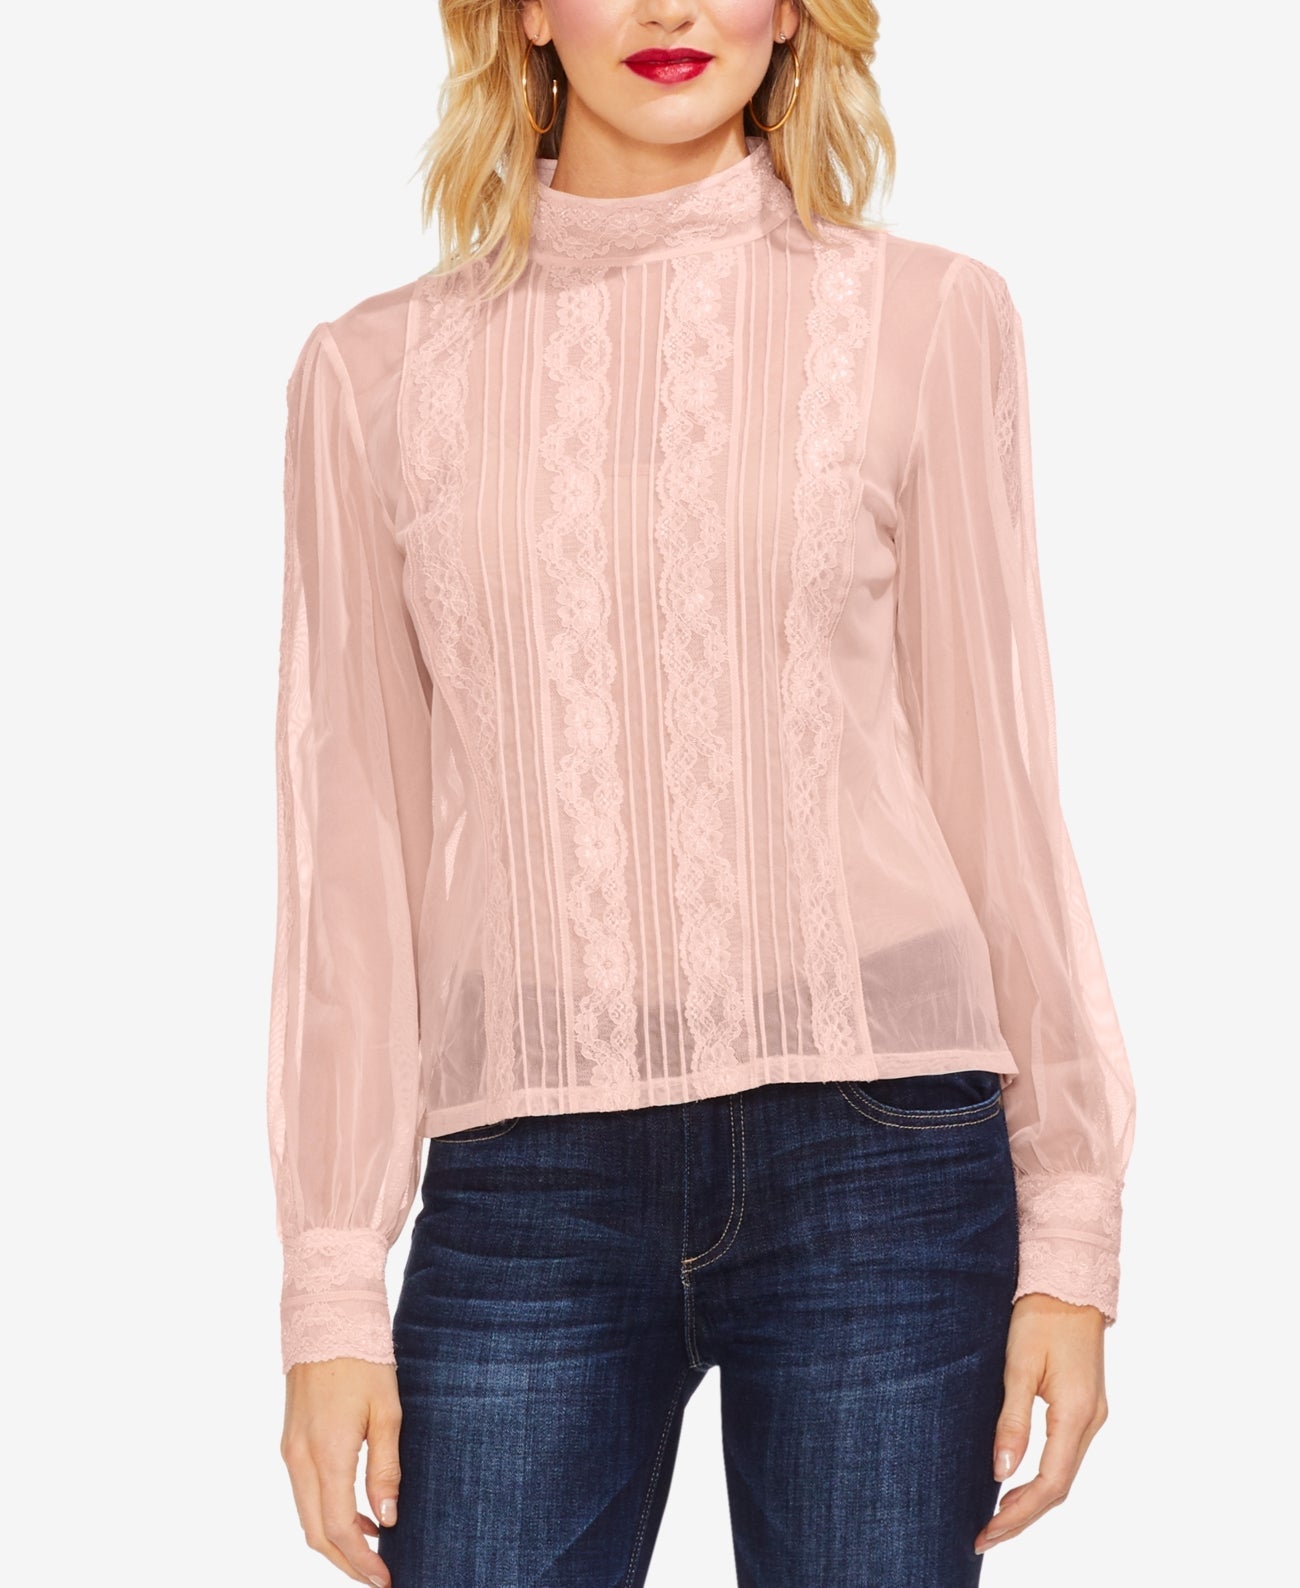 Vince Camuto Womens Mock Neck Mesh and Lace Blouse